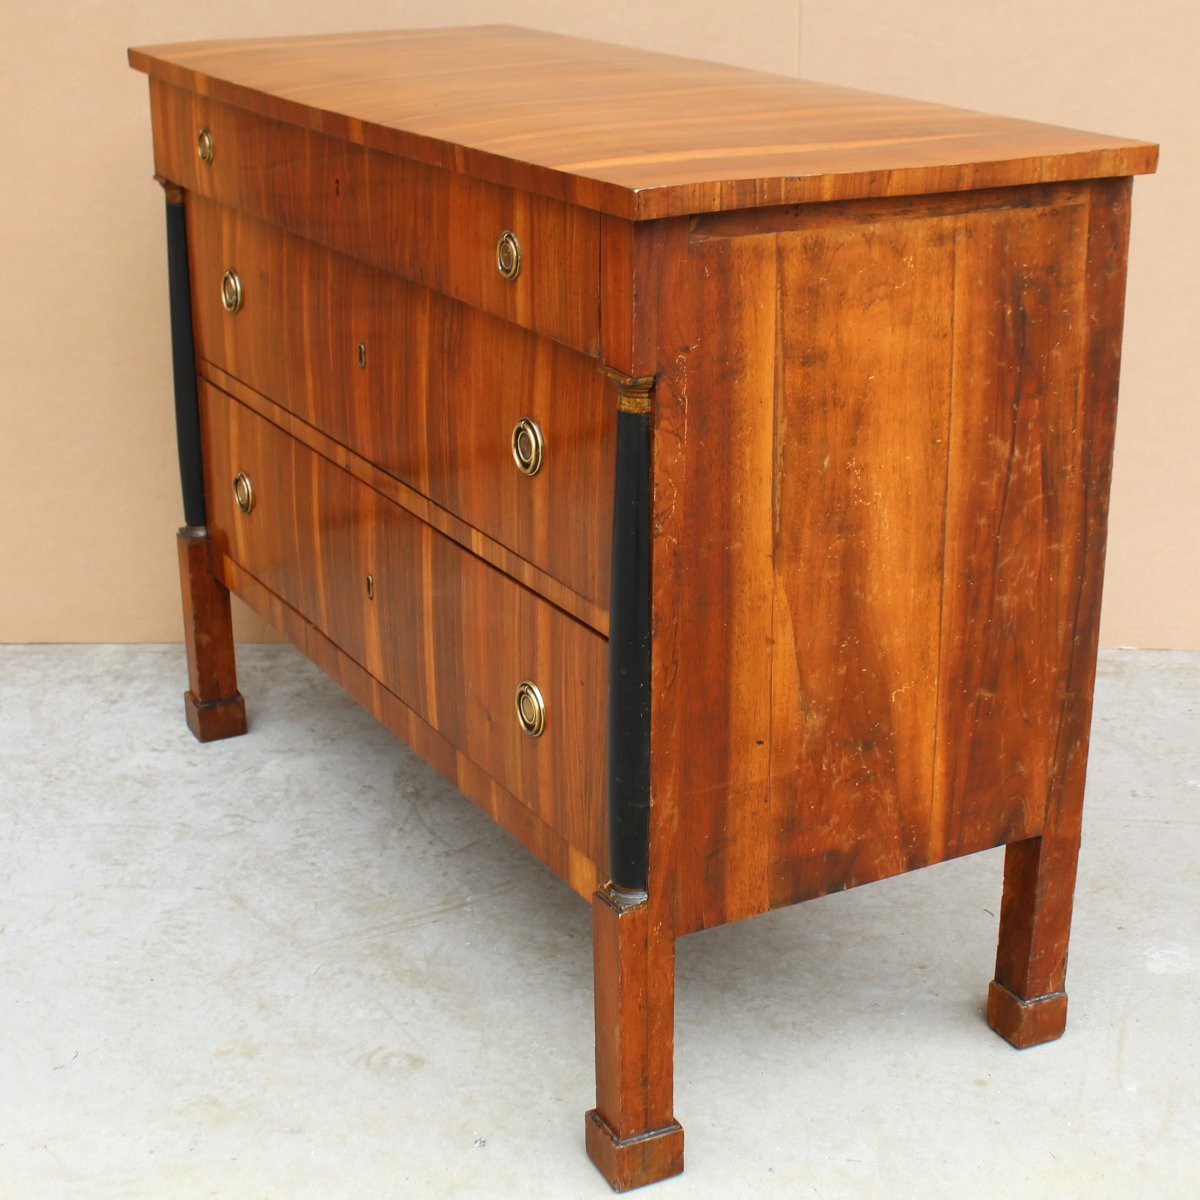 Antique Empire Dresser Commode Chest Of Drawers In Walnut - Italy 19th Century-photo-1